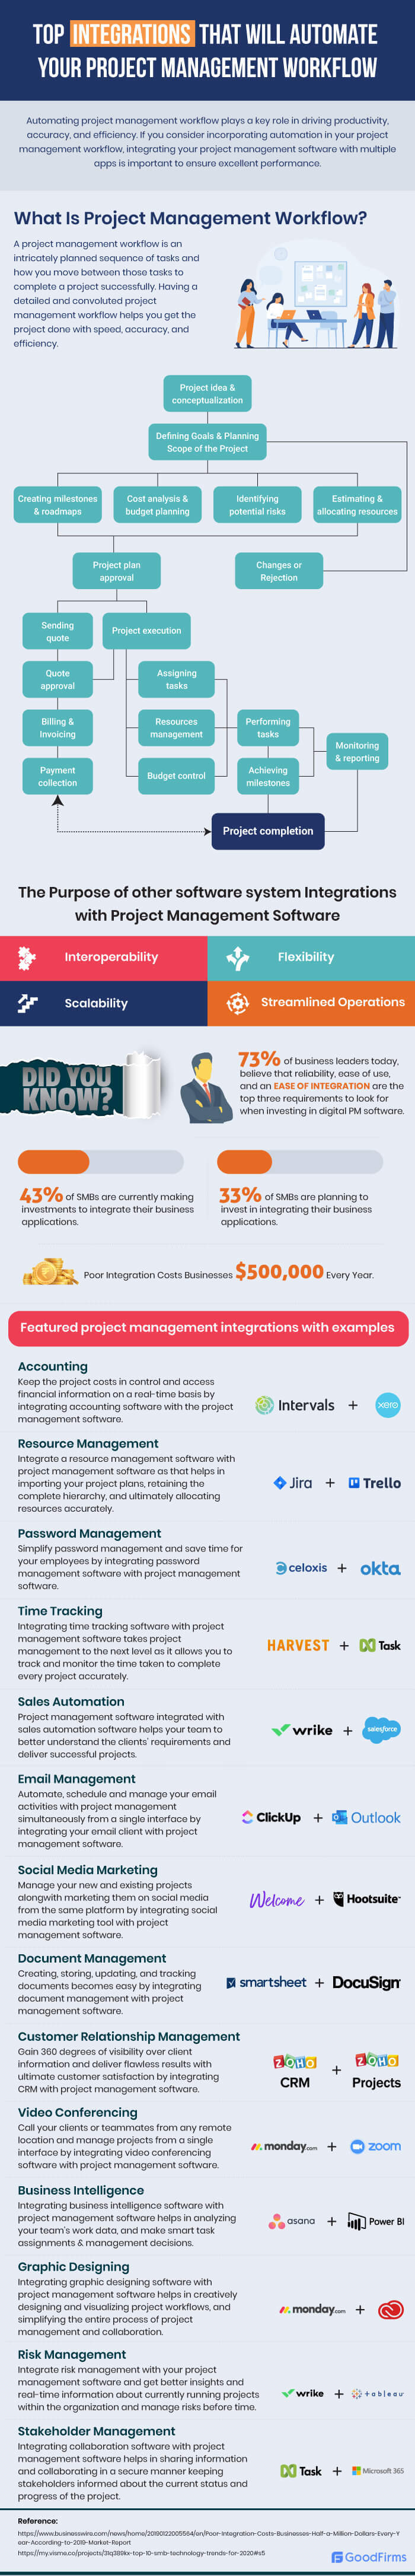 Top Integrations for Project Management Software